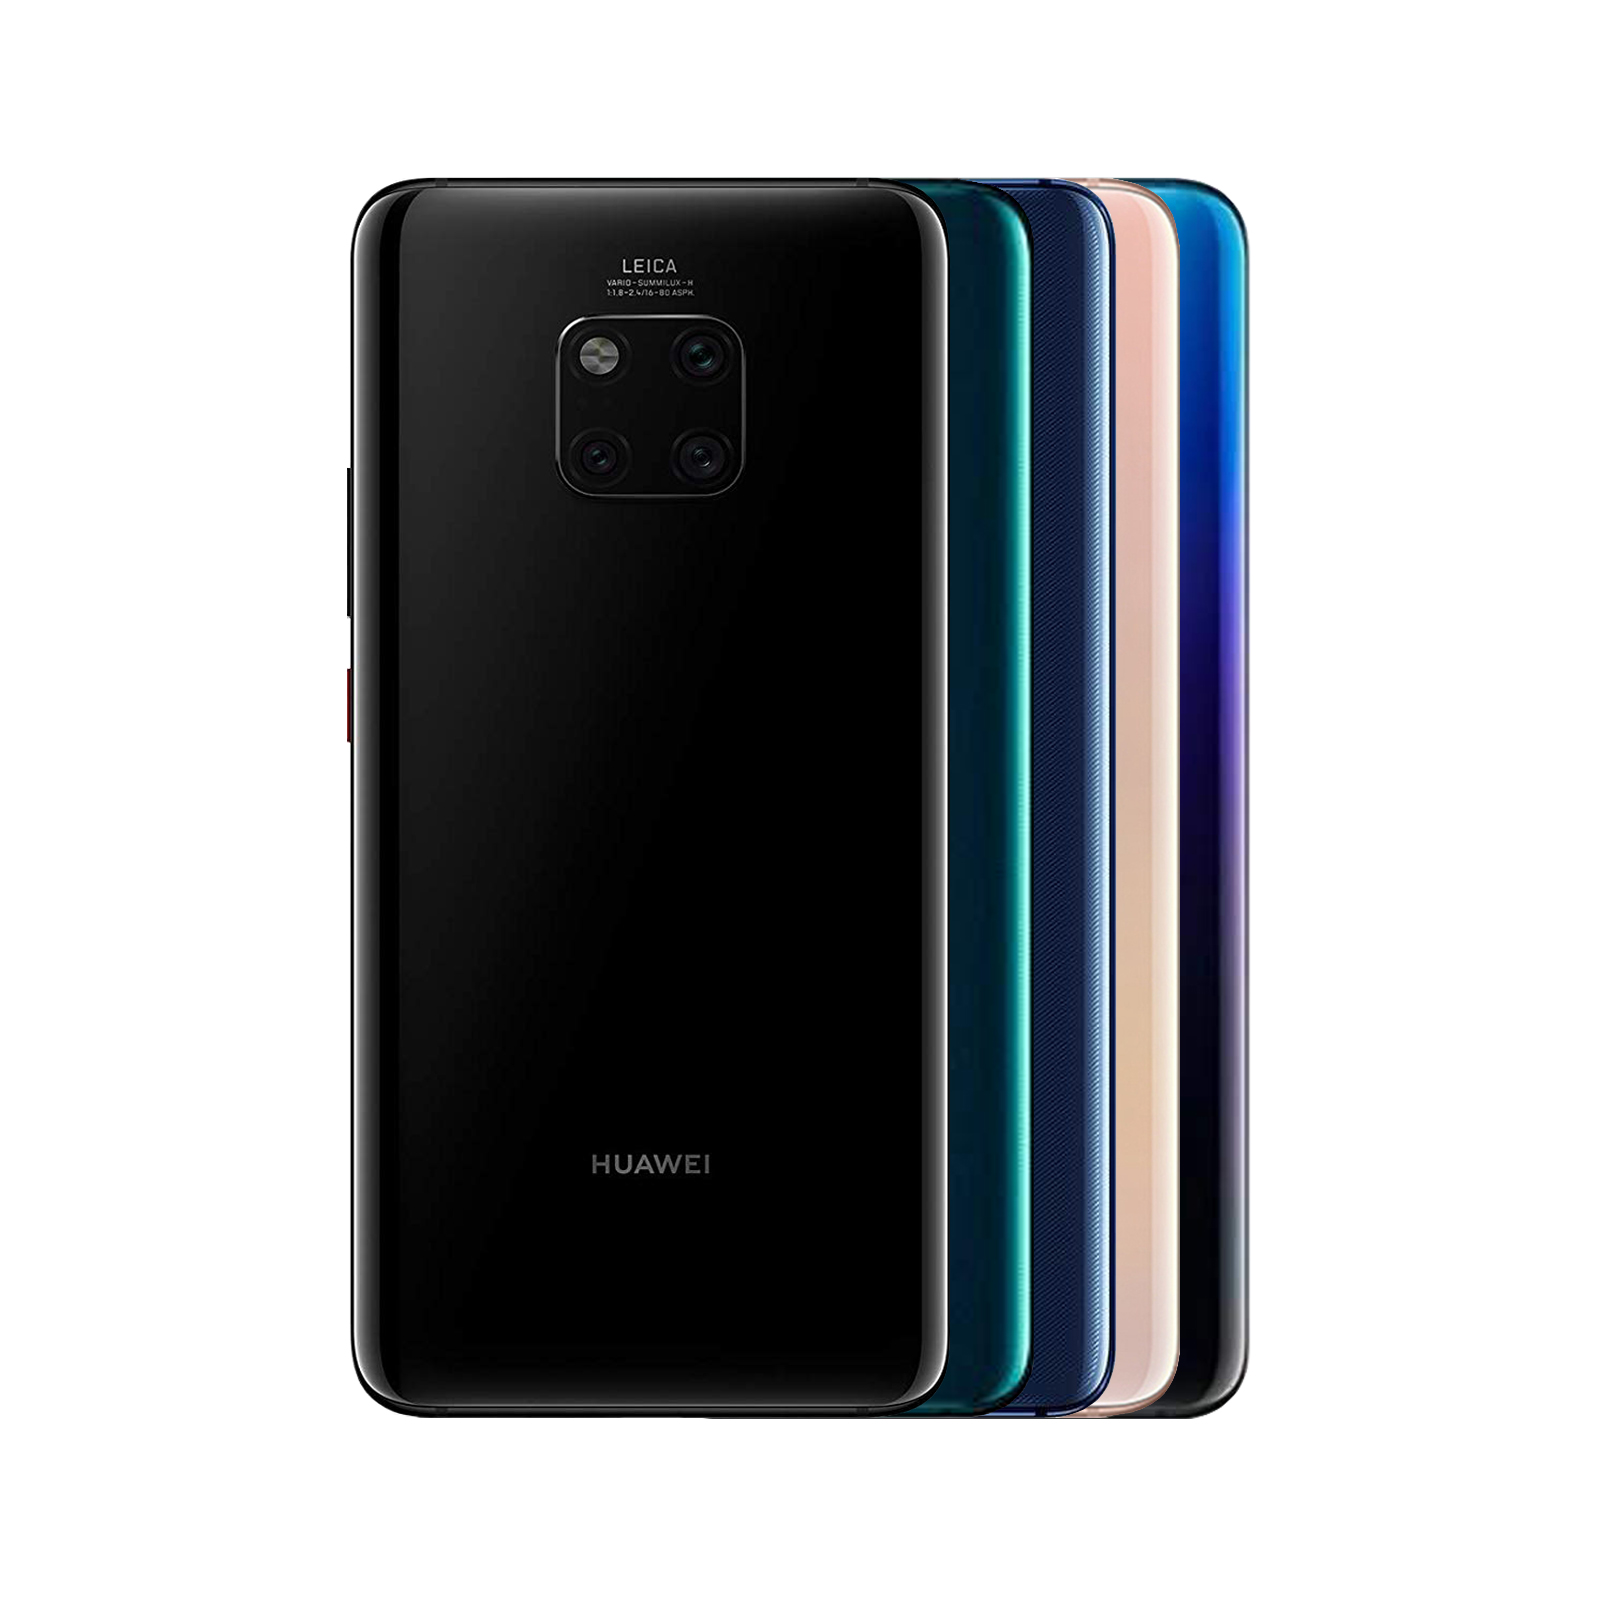 Huawei Mate 20 Pro - As New